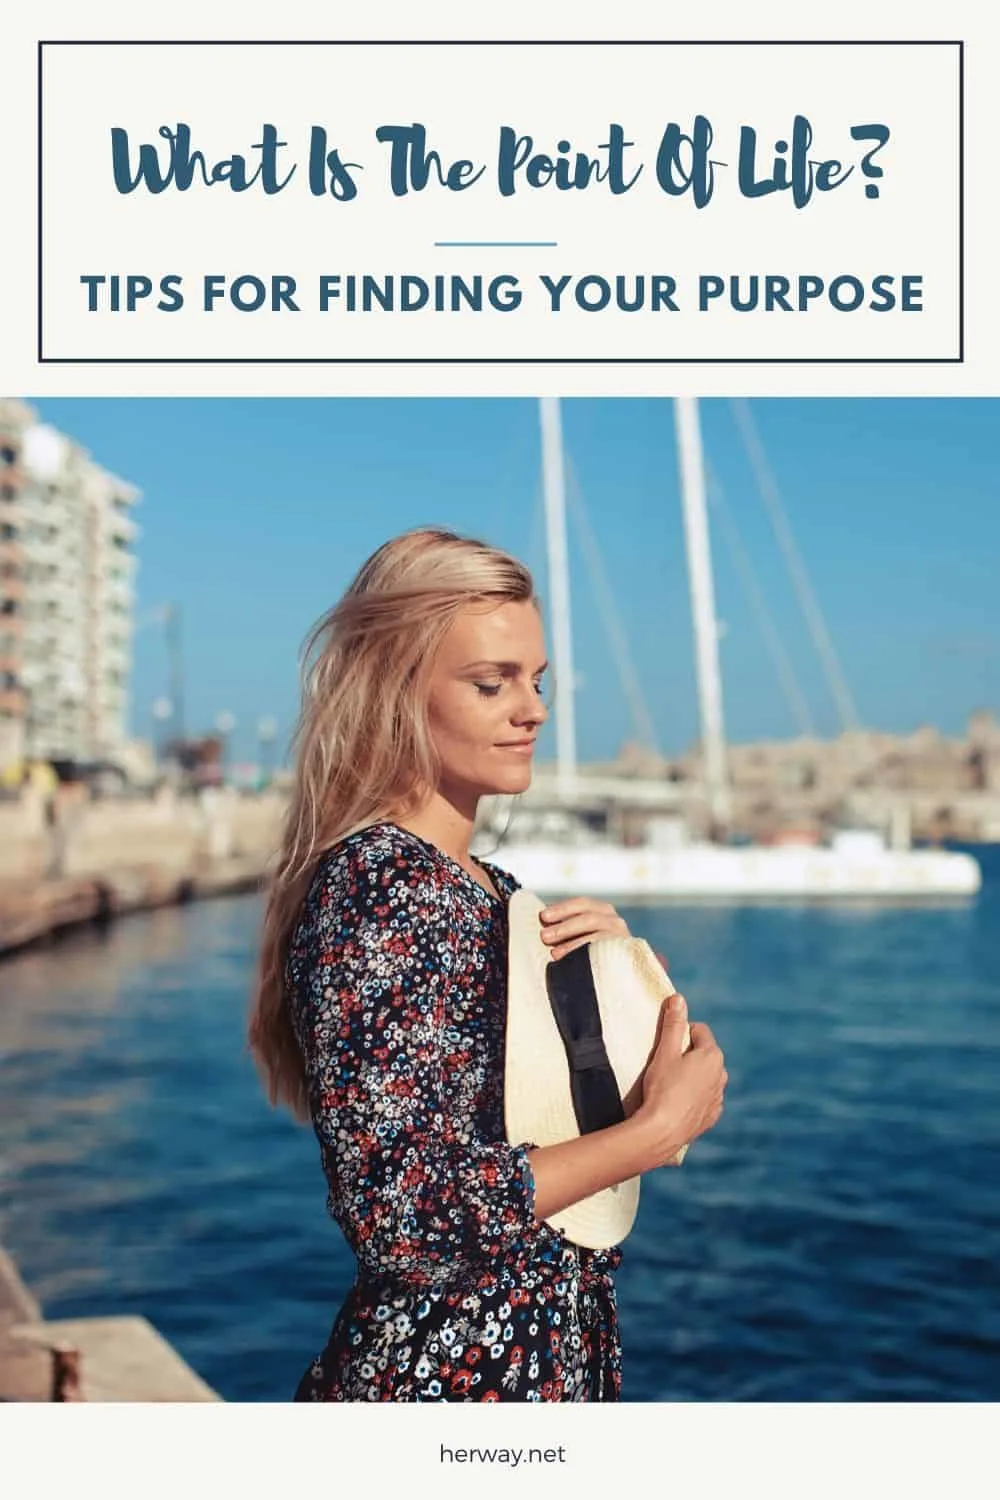 What Is The Point Of Life? Tips For Finding Your Purpose